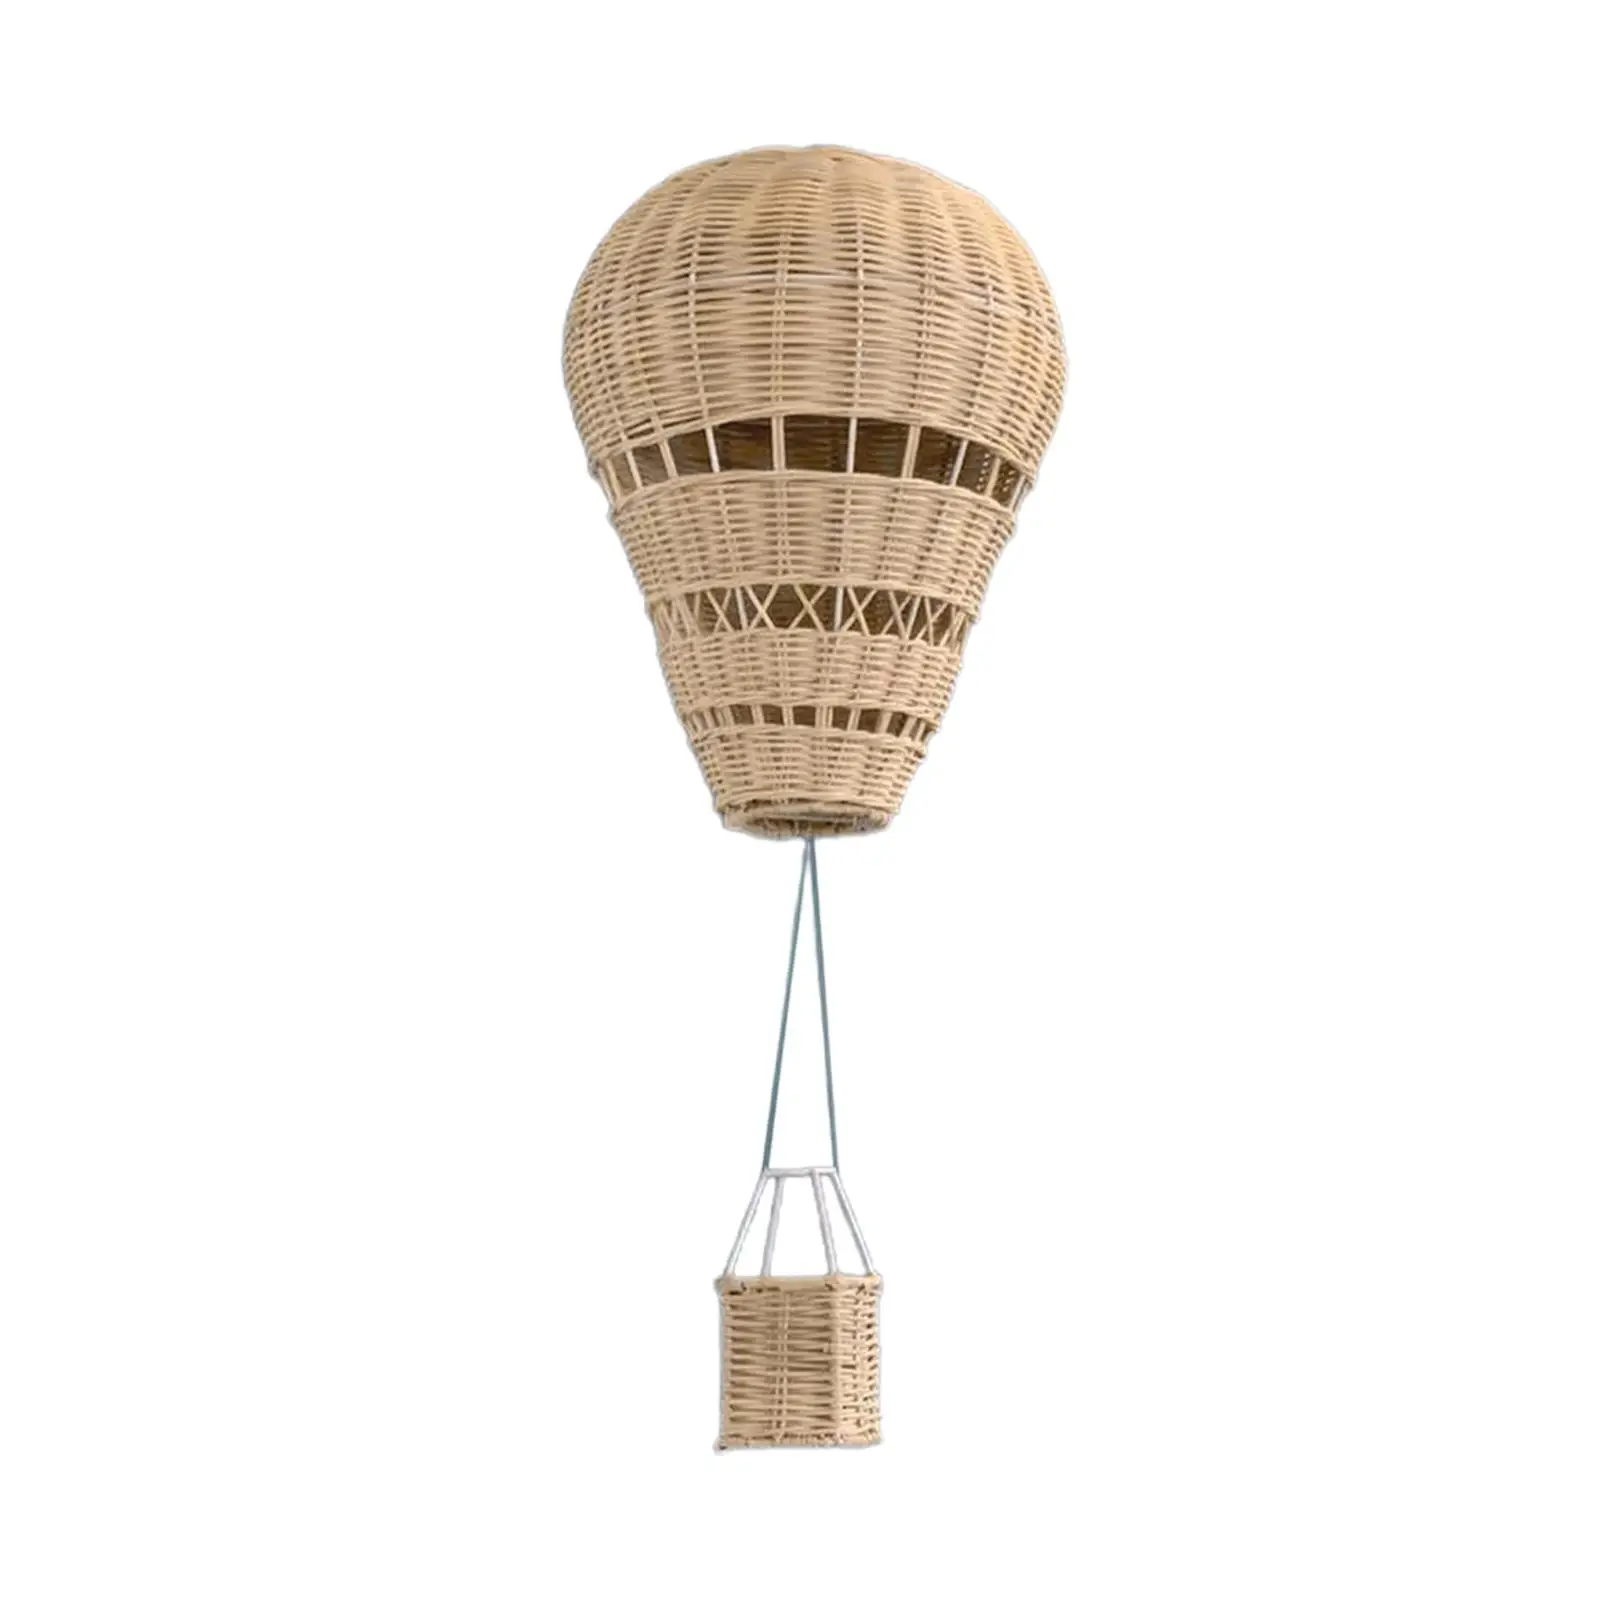 Hot Air Balloon Photography Birthday Gift Unique Wall Hanging Ornament Crafts Party Ceiling Creative Backdrop Pendant Decoration